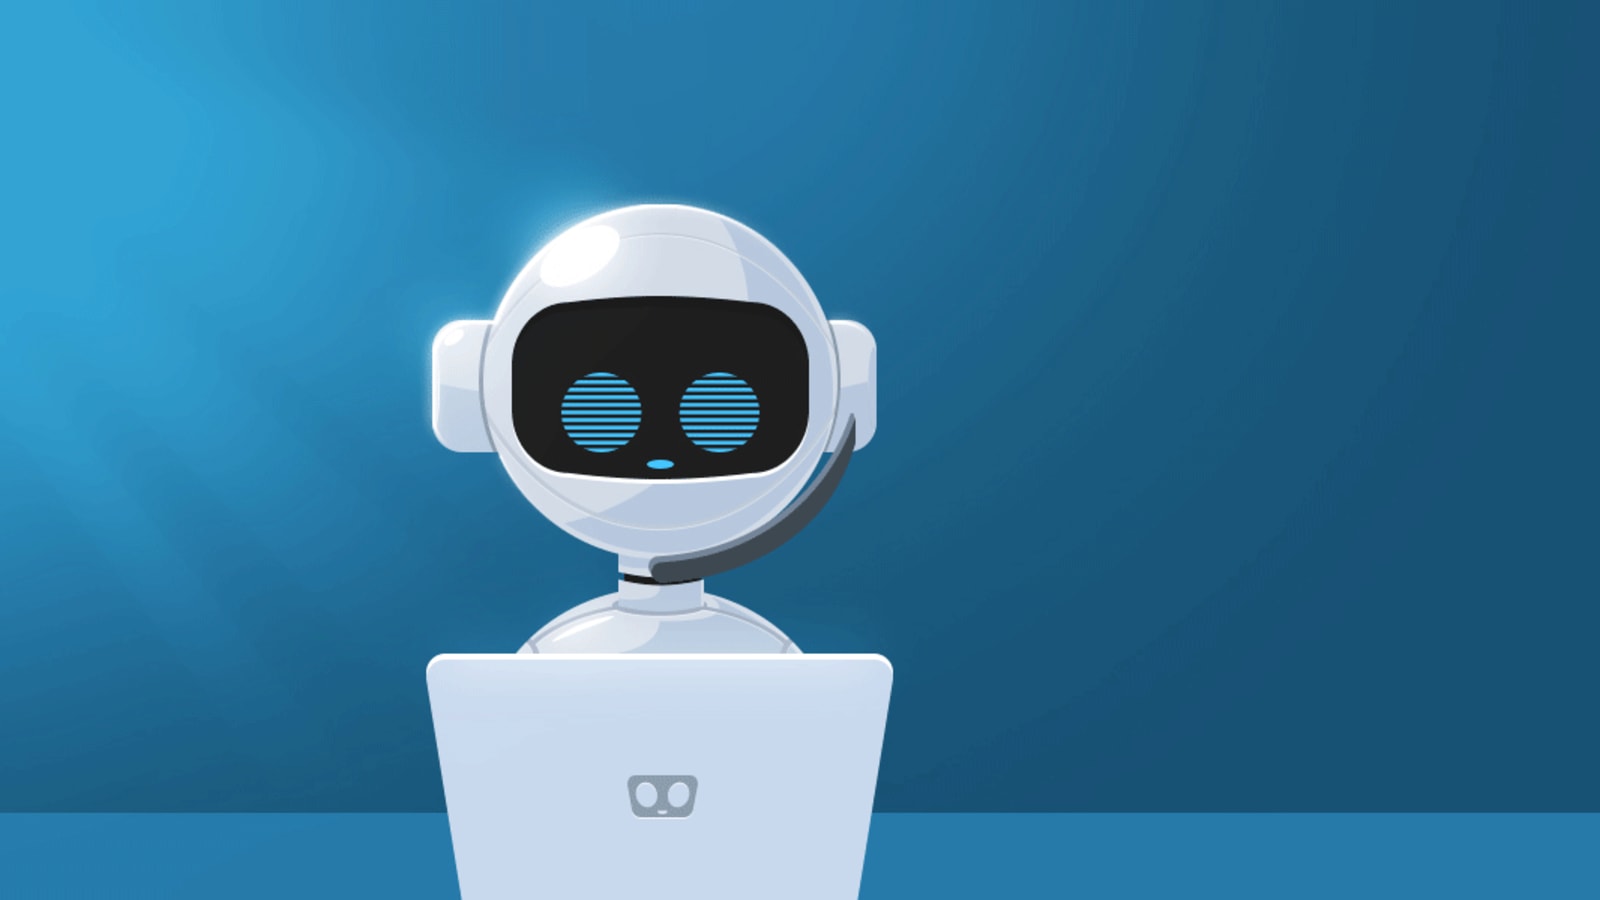 Make a Simple Chatbot with JavaScript!